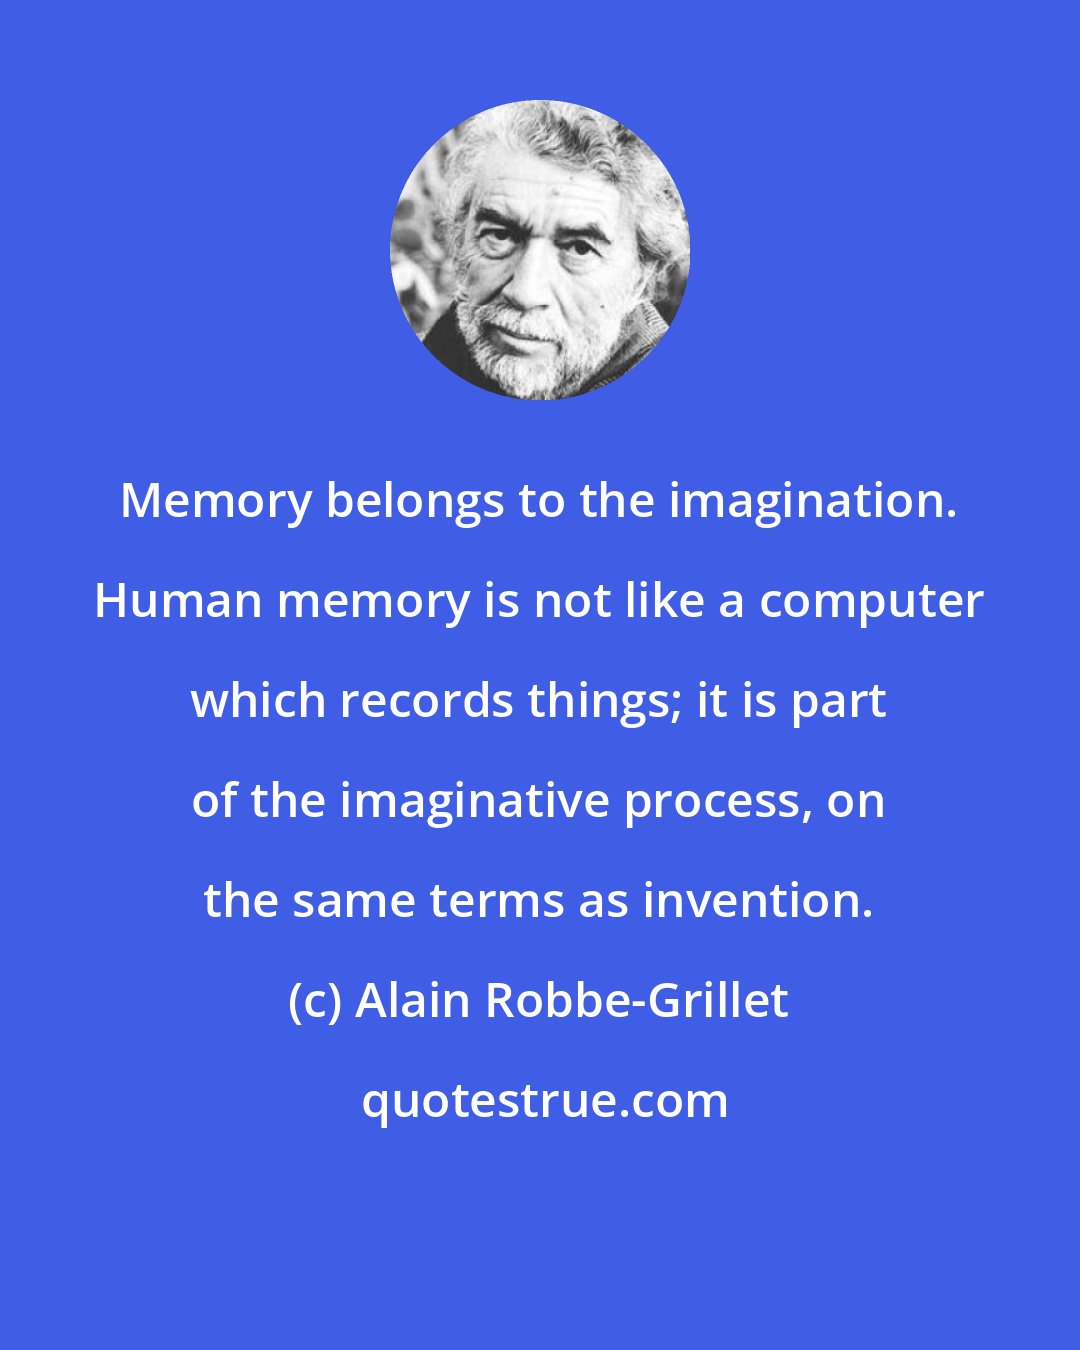 Alain Robbe-Grillet: Memory belongs to the imagination. Human memory is not like a computer which records things; it is part of the imaginative process, on the same terms as invention.